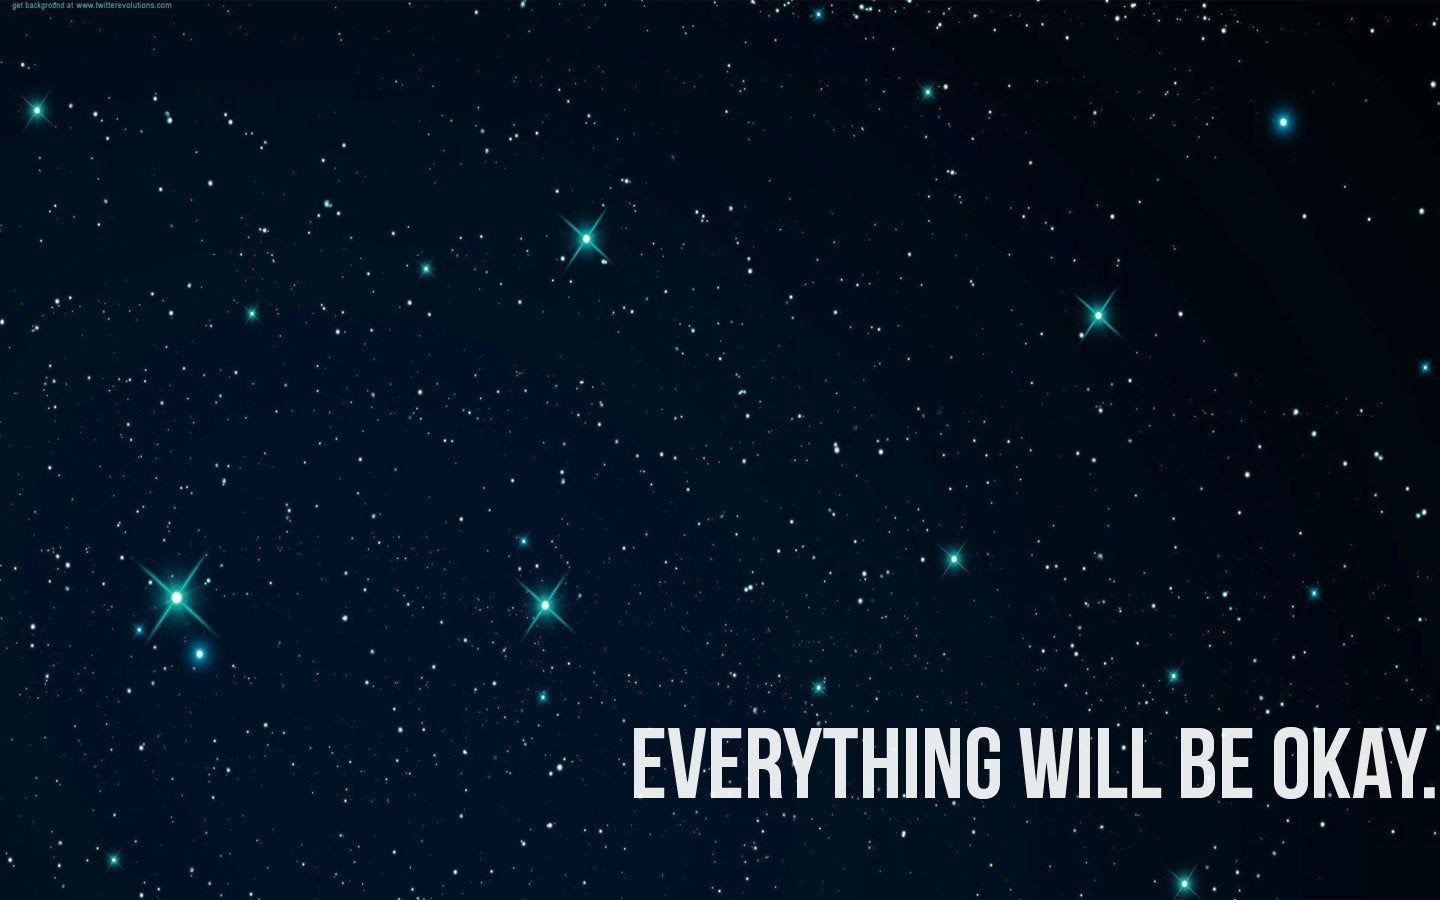 Everything will be okay. [1440x900]